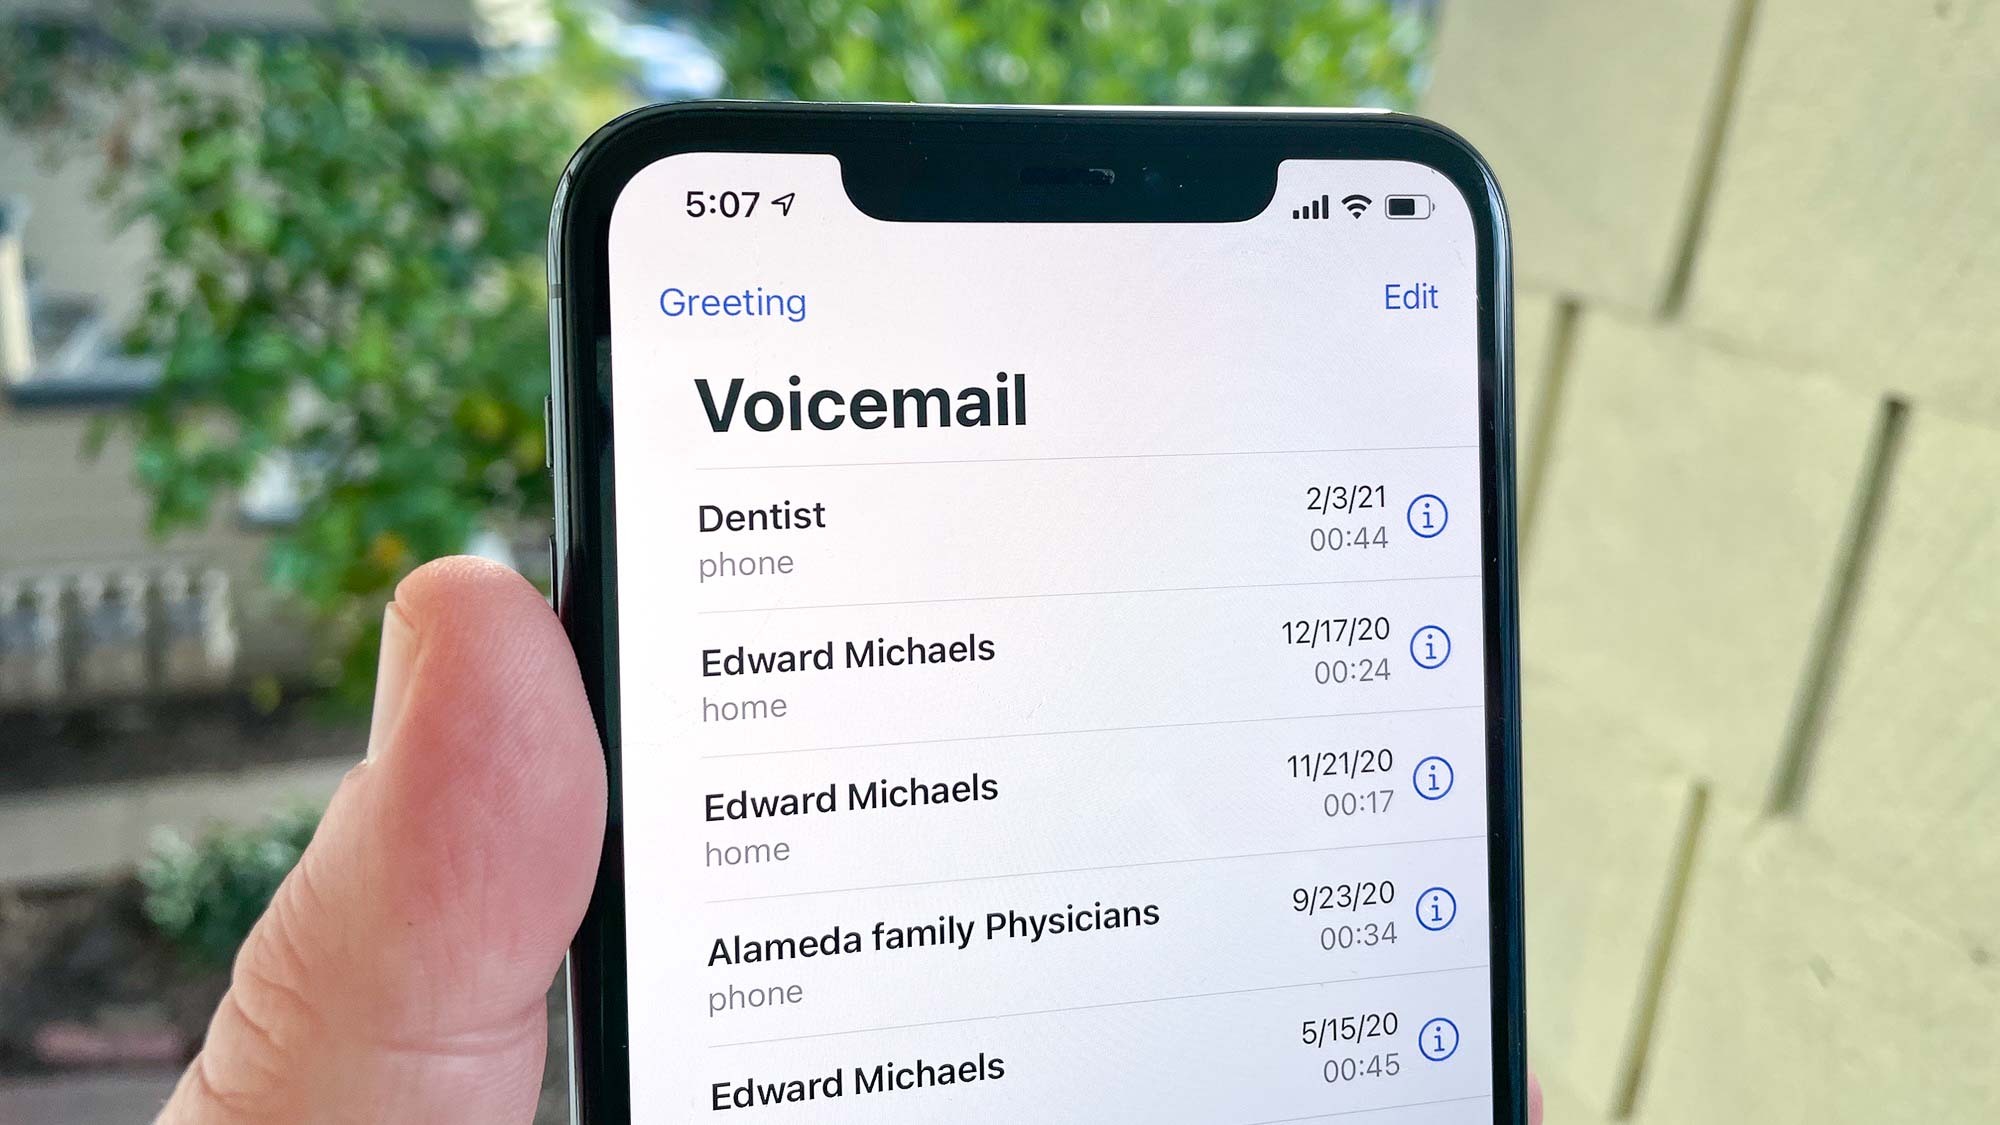 How To Change Voicemail Greeting on Android